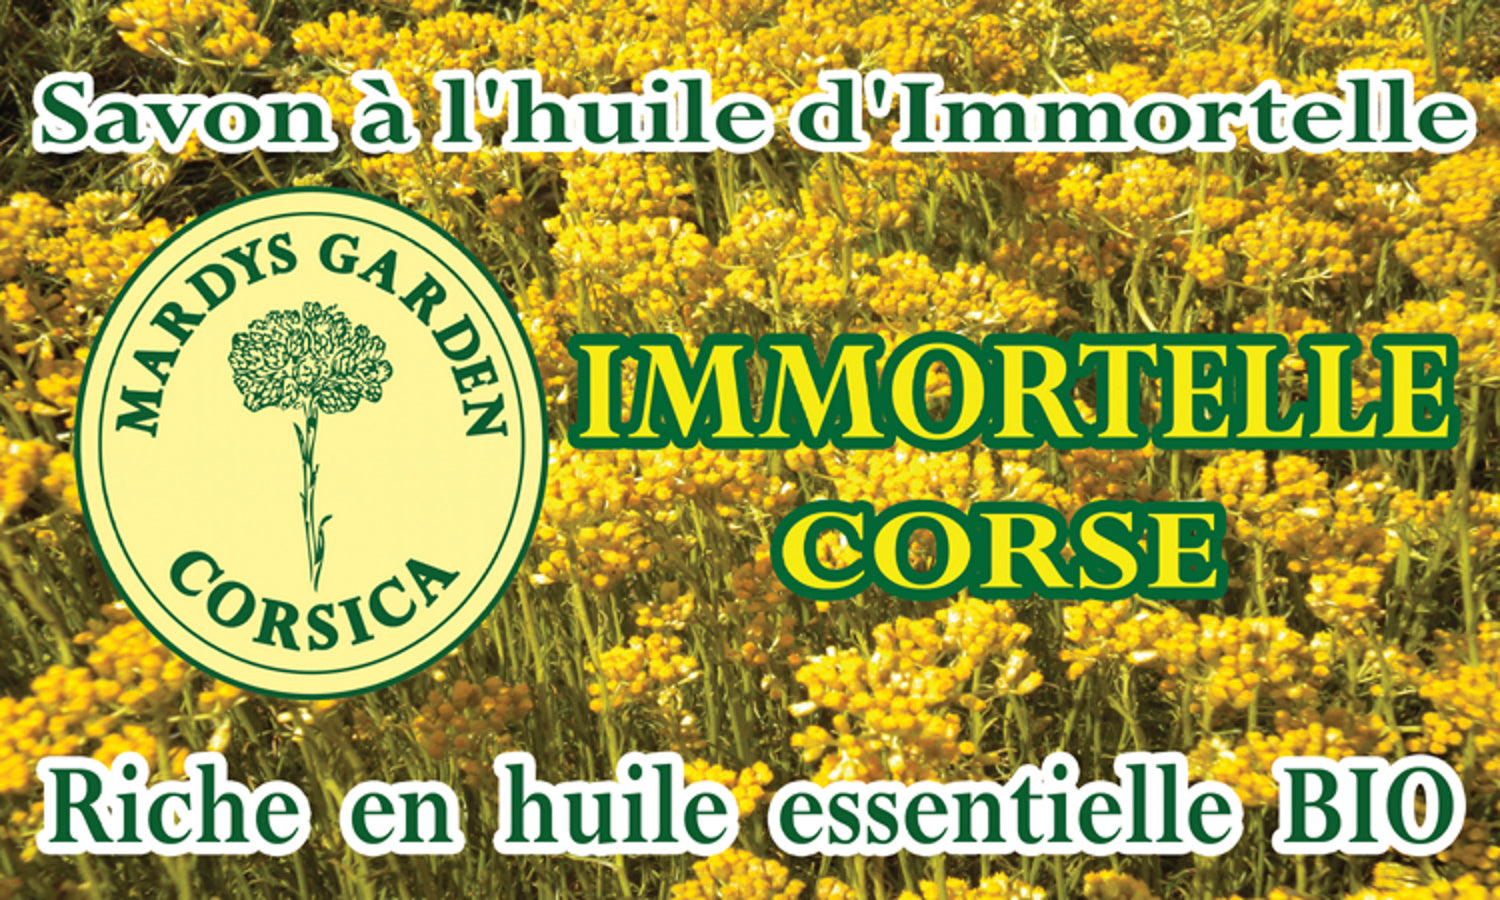 Immortelle Soap 100g label. Immortelle from Corsica. Rich in organic essential oil